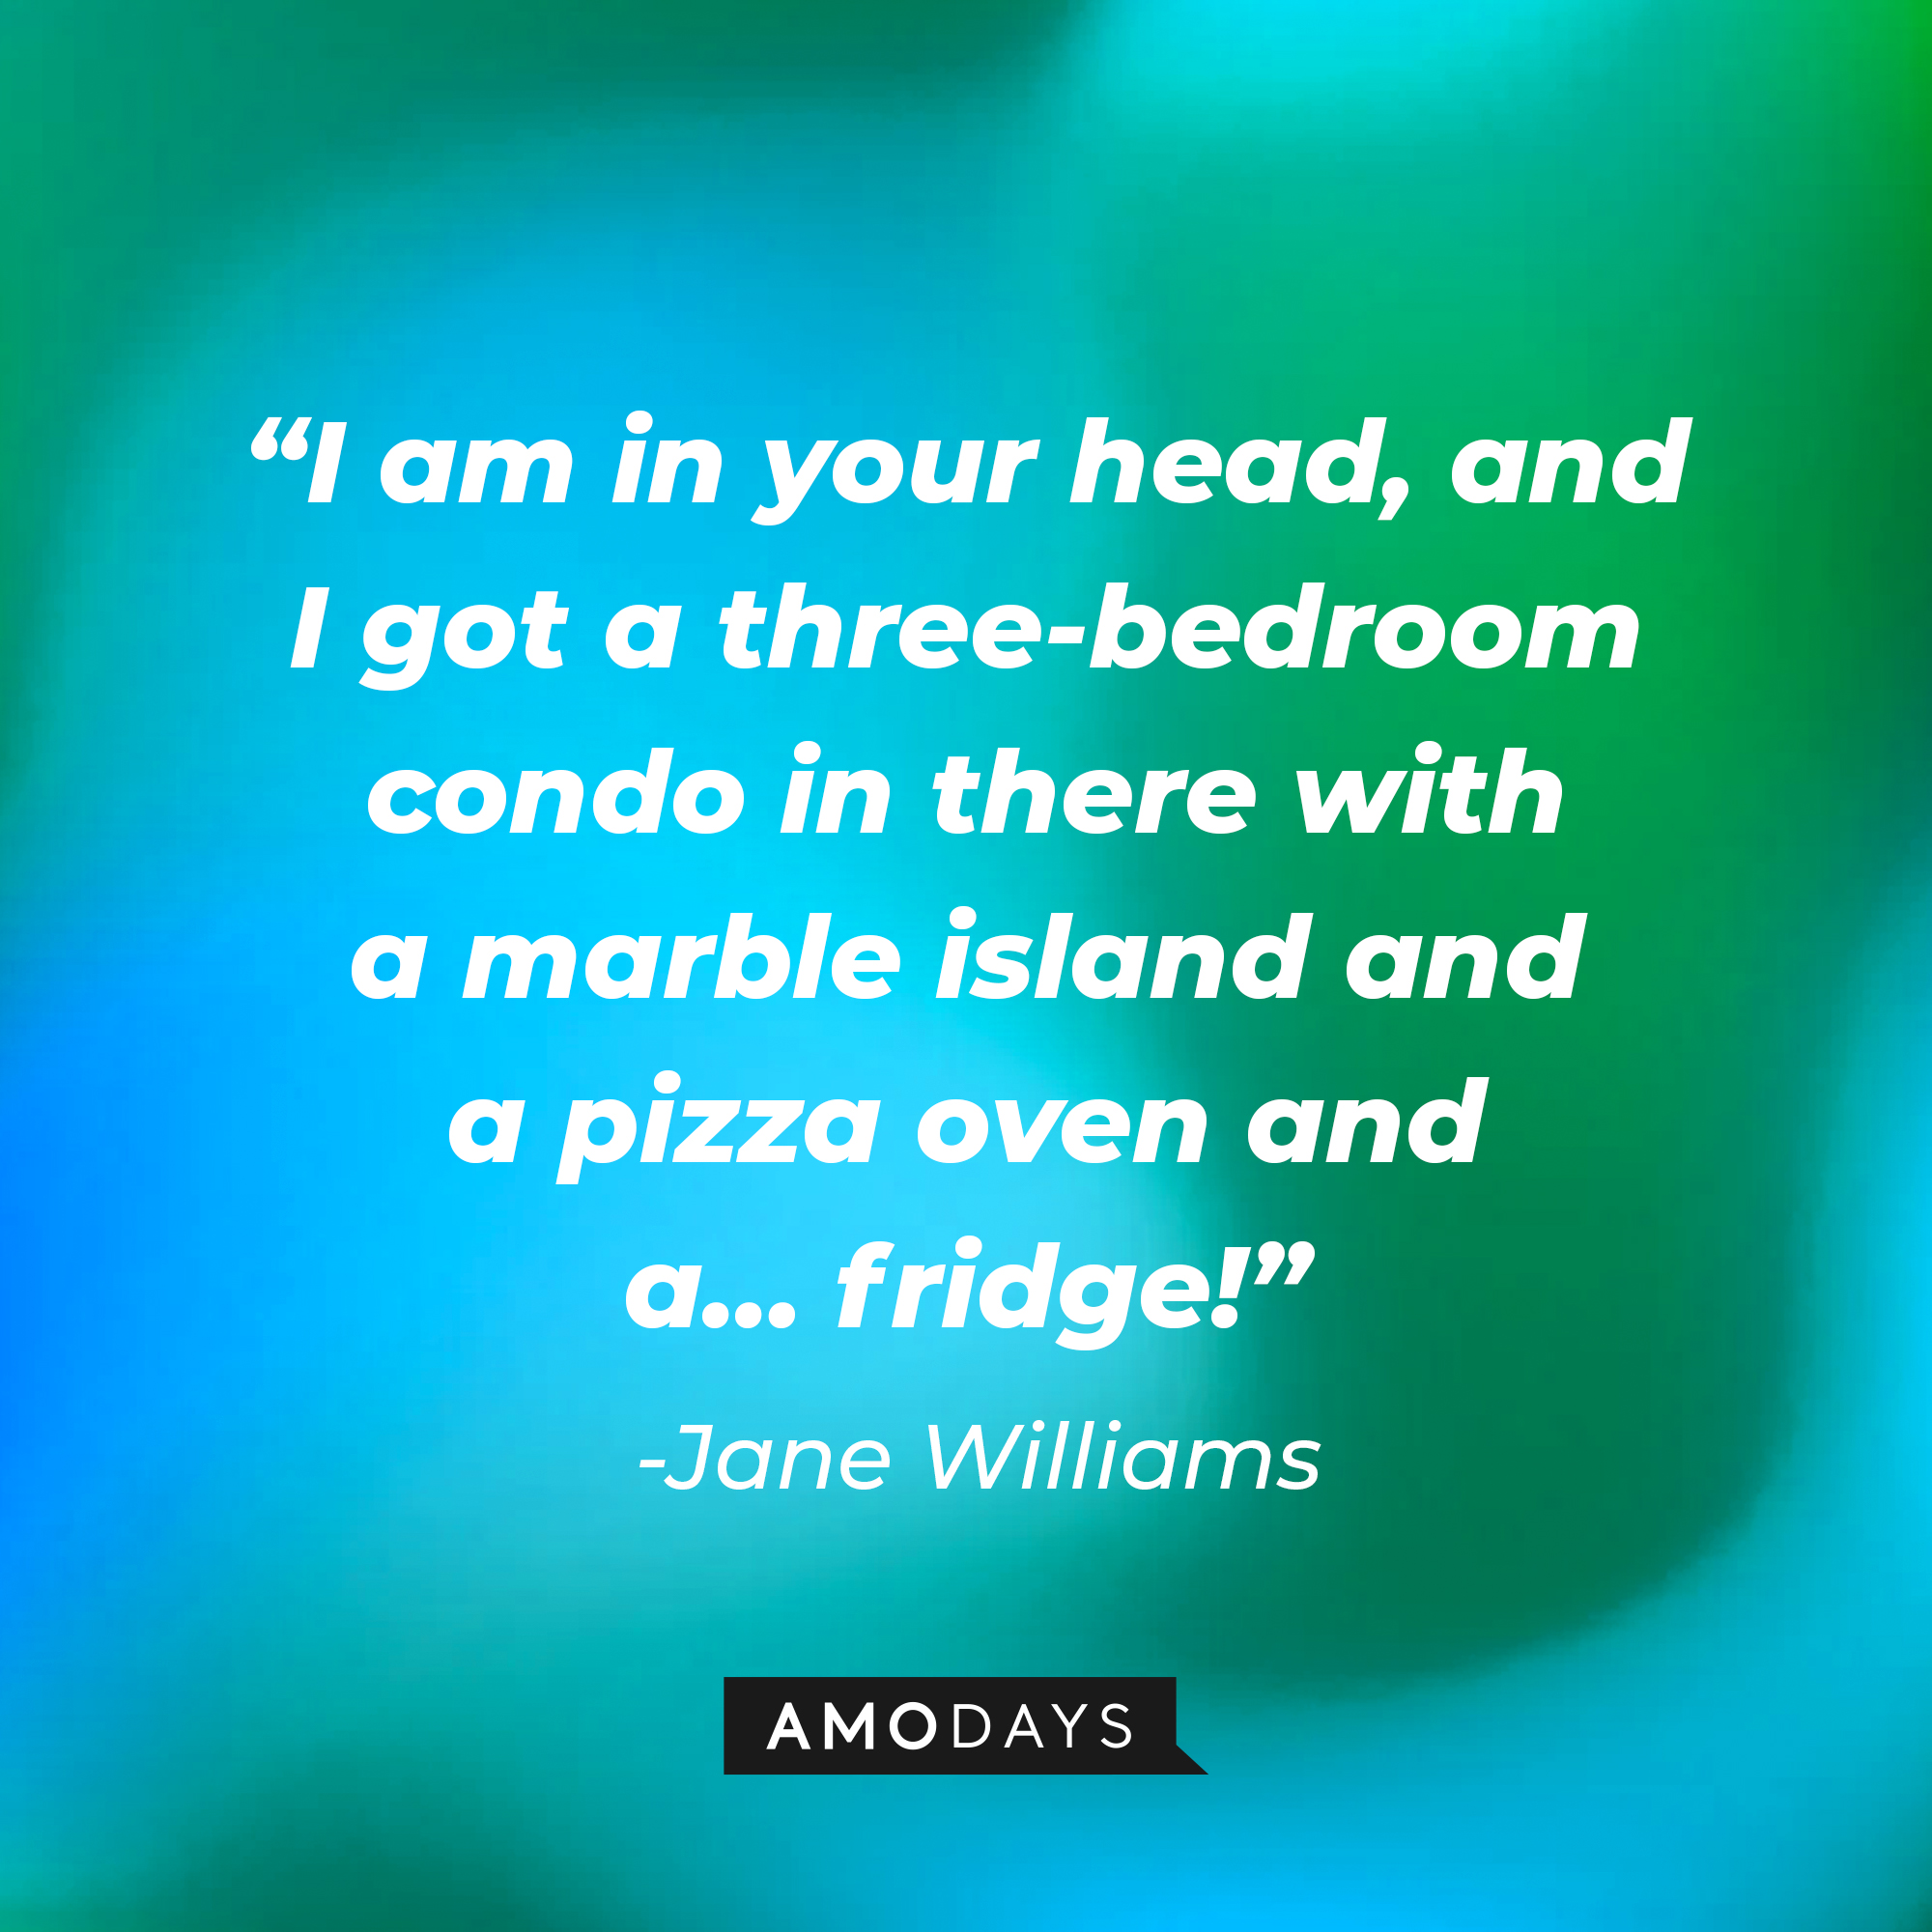 Jane Williams' quote, "I am in your head, and I got a three-bedroom condo in there with a marble island and a pizza oven and a… fridge!" | Source: Facebook/HappyEndings